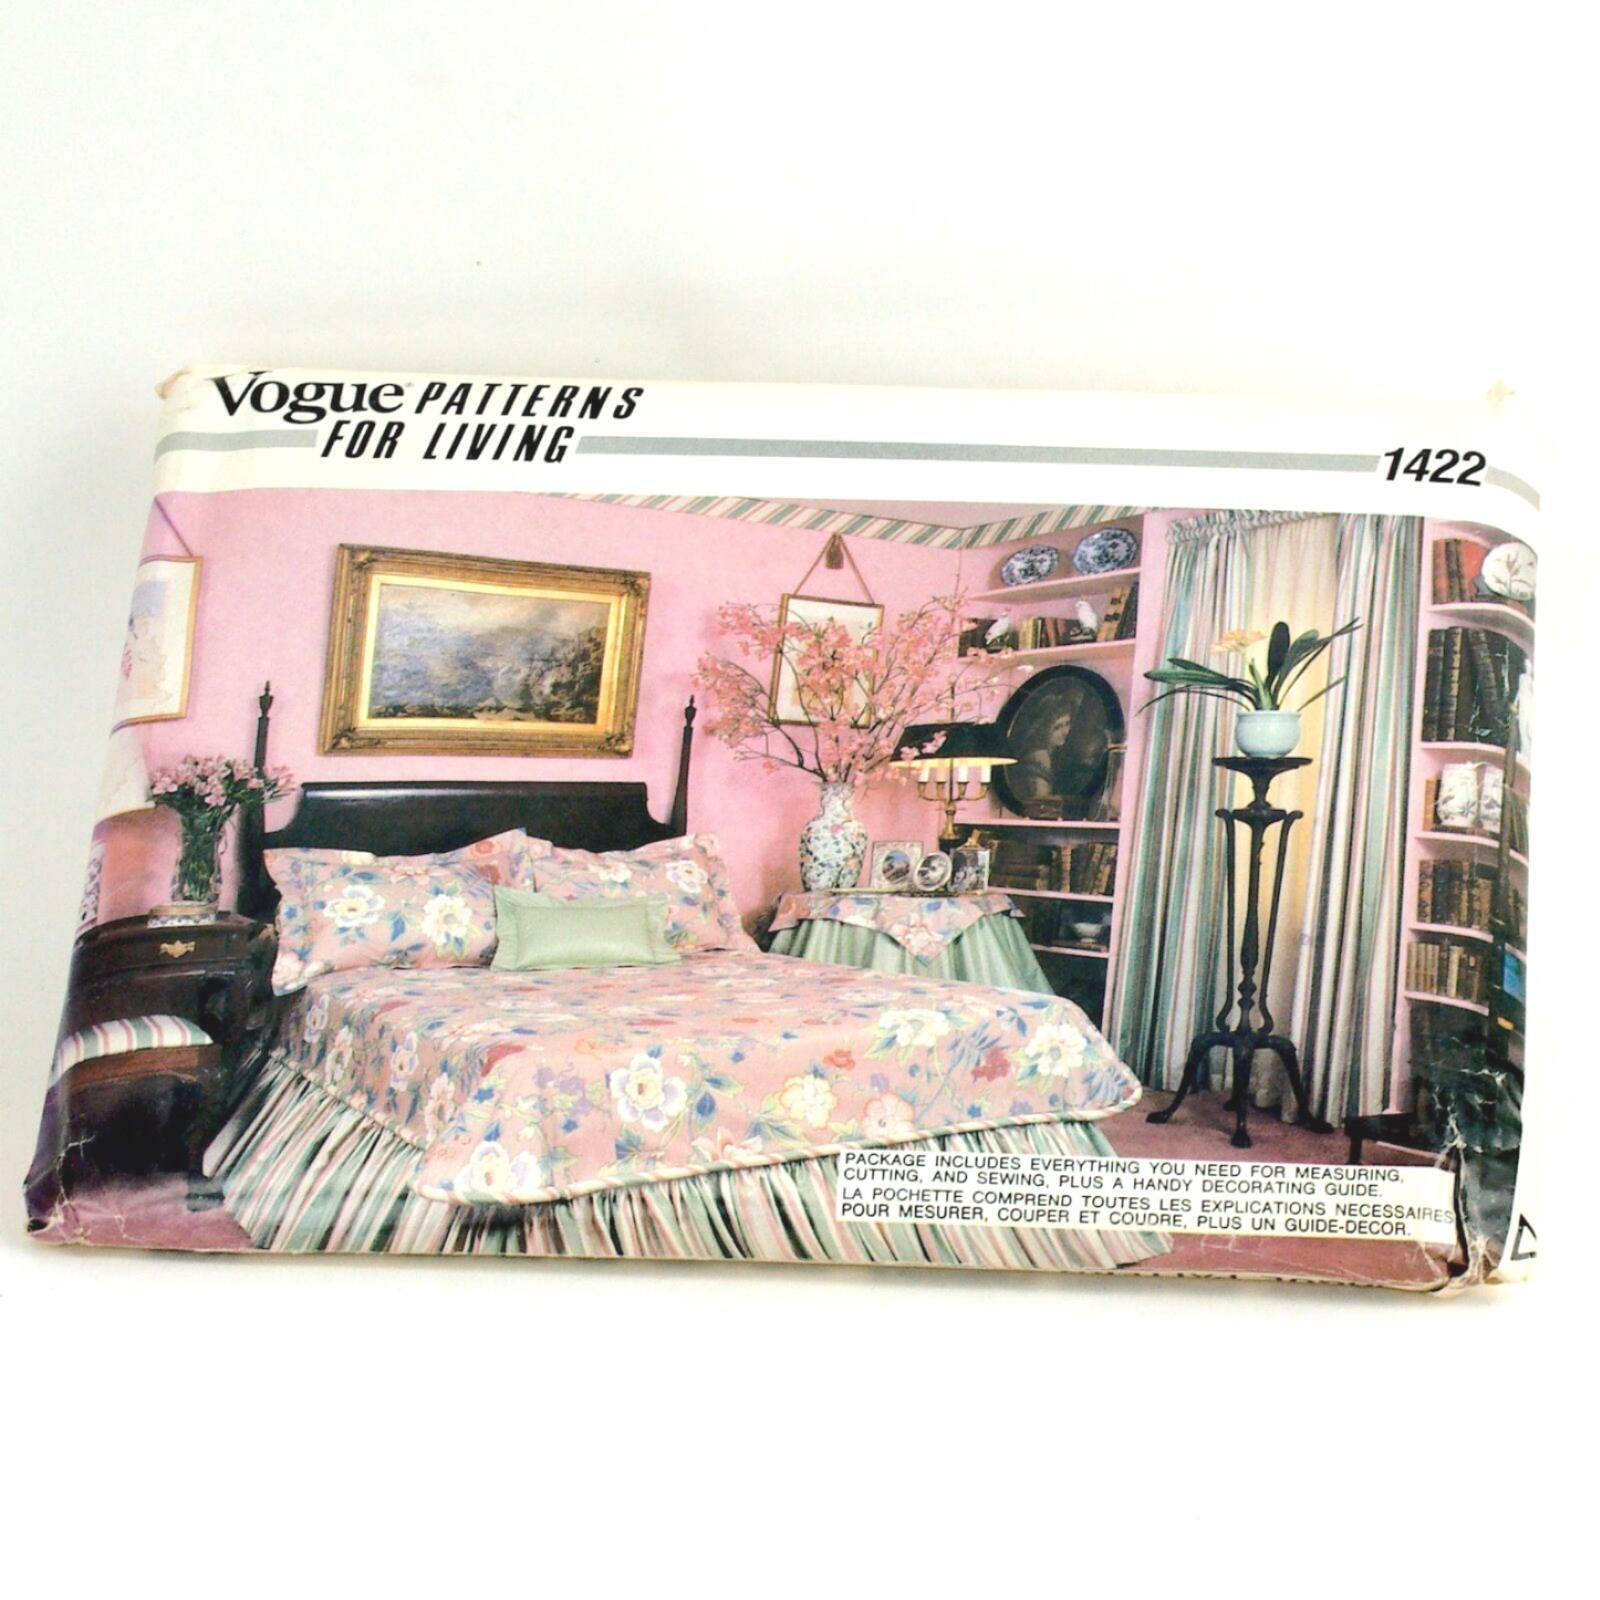 Primary image for Vogue Patterns for Living 1422 Sewing Pattern Uncut Bedroom Decorating Comforter